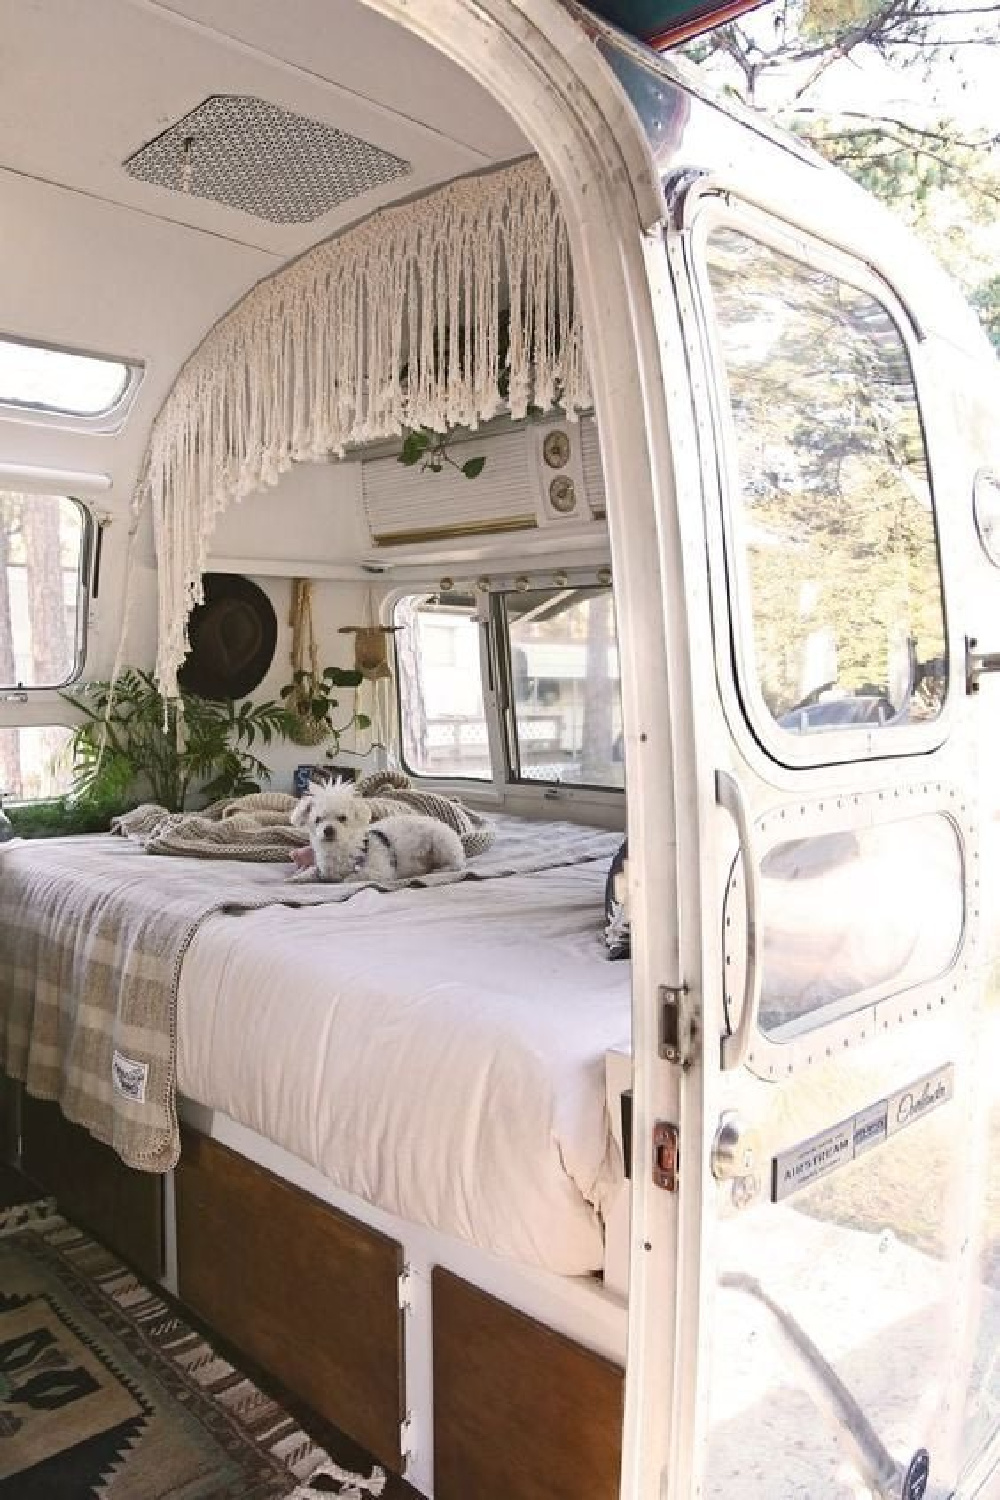 Vintage Airstream with a little white dog inside on the bed - via A Humble, Simple Life. #vintagecampers #airstream